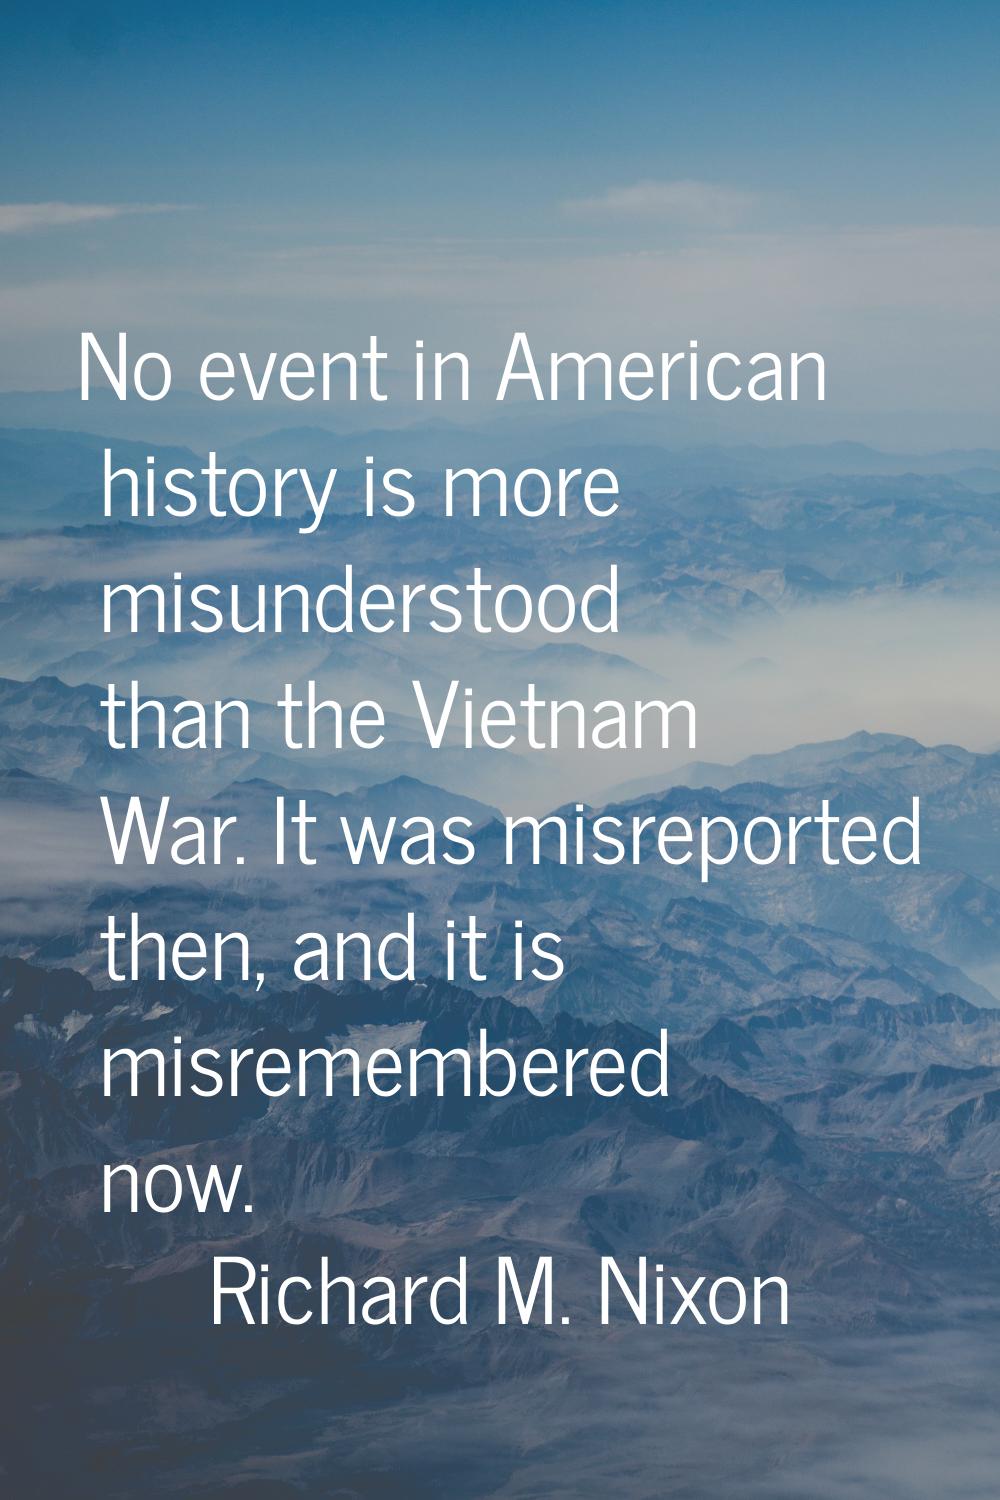 No event in American history is more misunderstood than the Vietnam War. It was misreported then, a